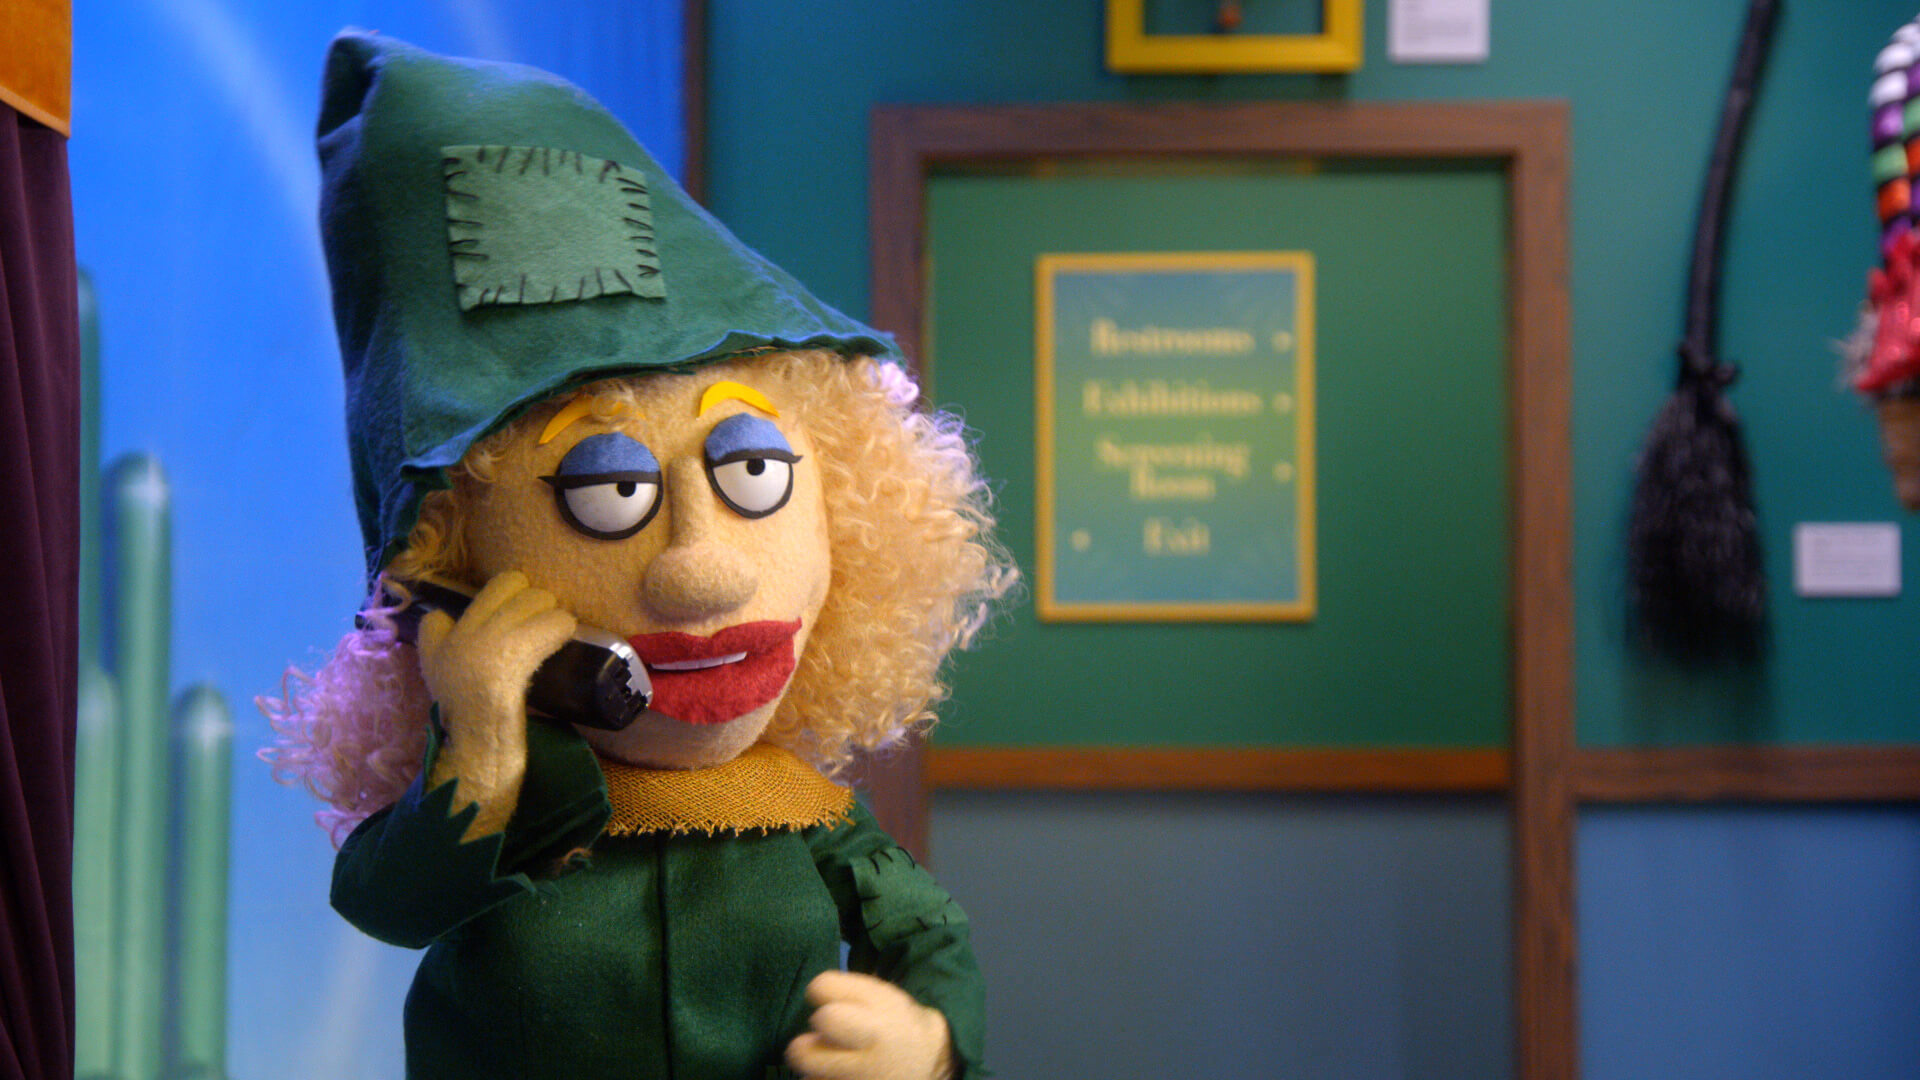 A female puppet dressed as a witch aswers a prank call from Thomas Lennon in a scene from Crank Yankers edited by Todd Bishop